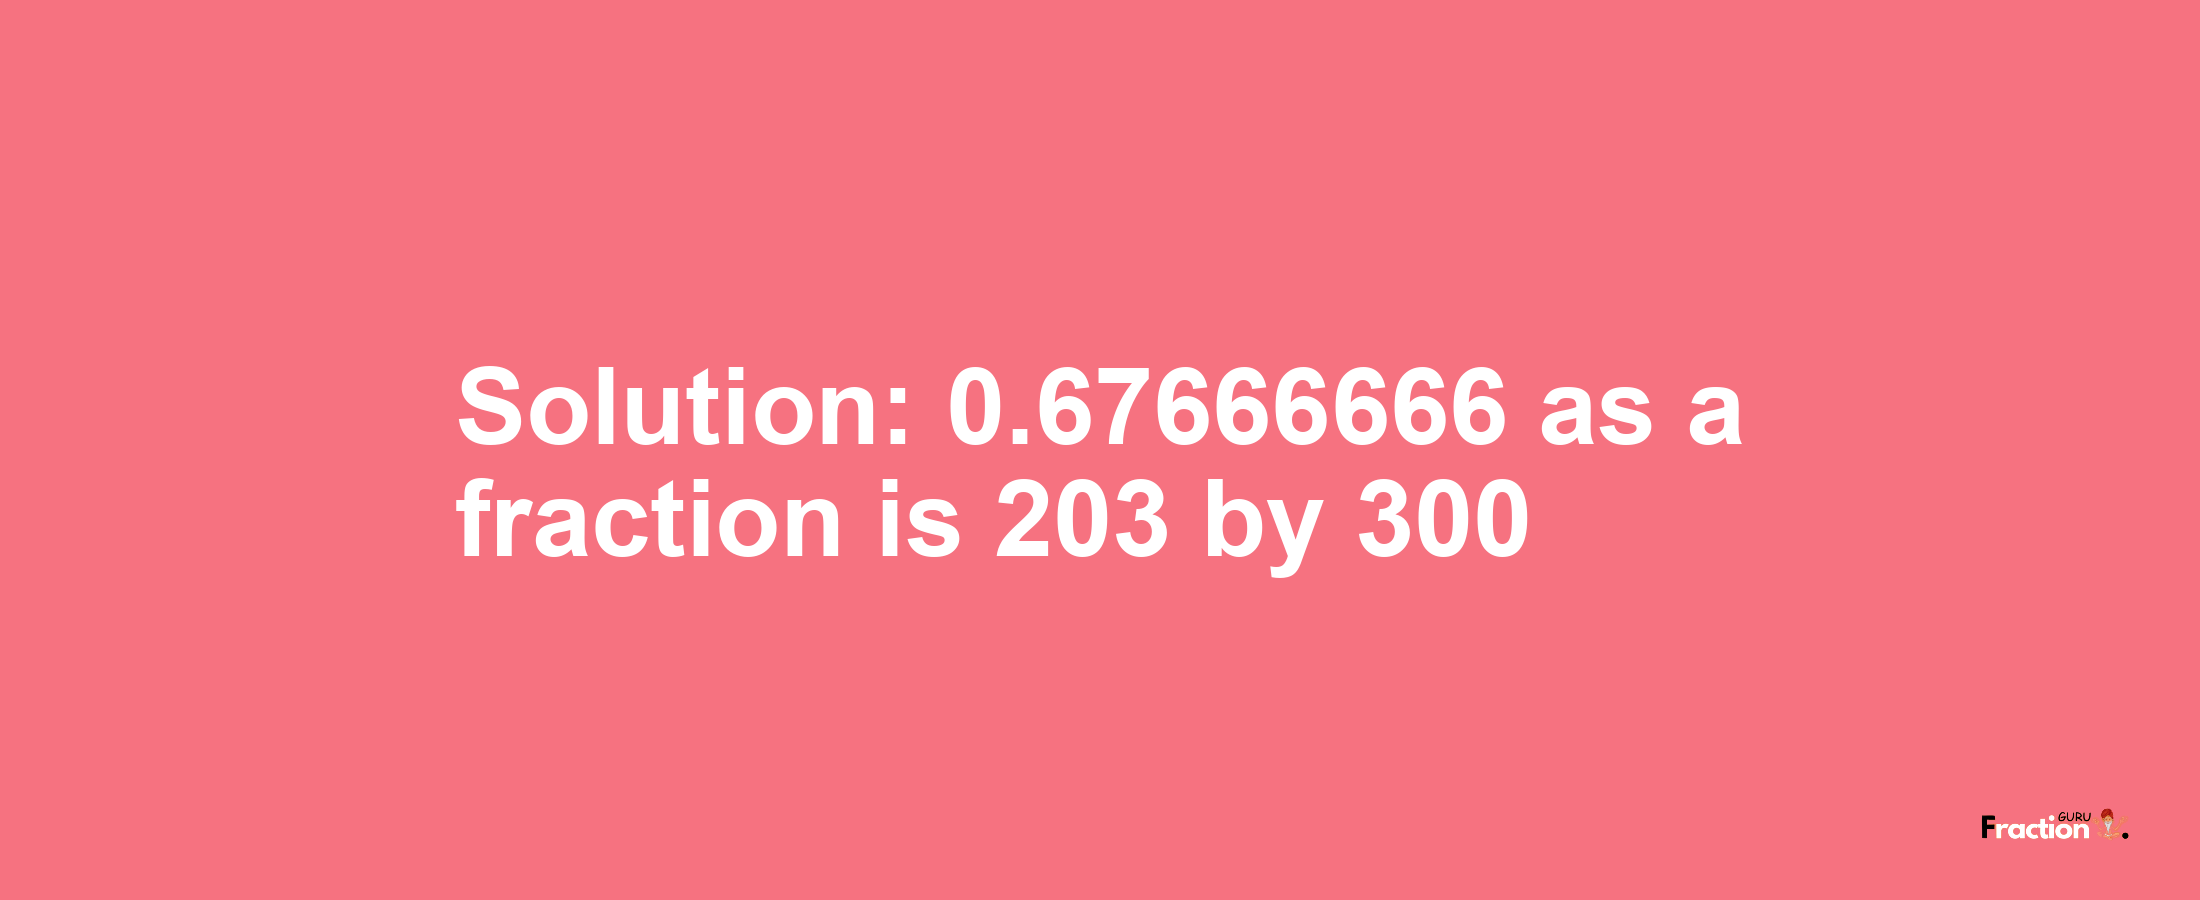 Solution:0.67666666 as a fraction is 203/300